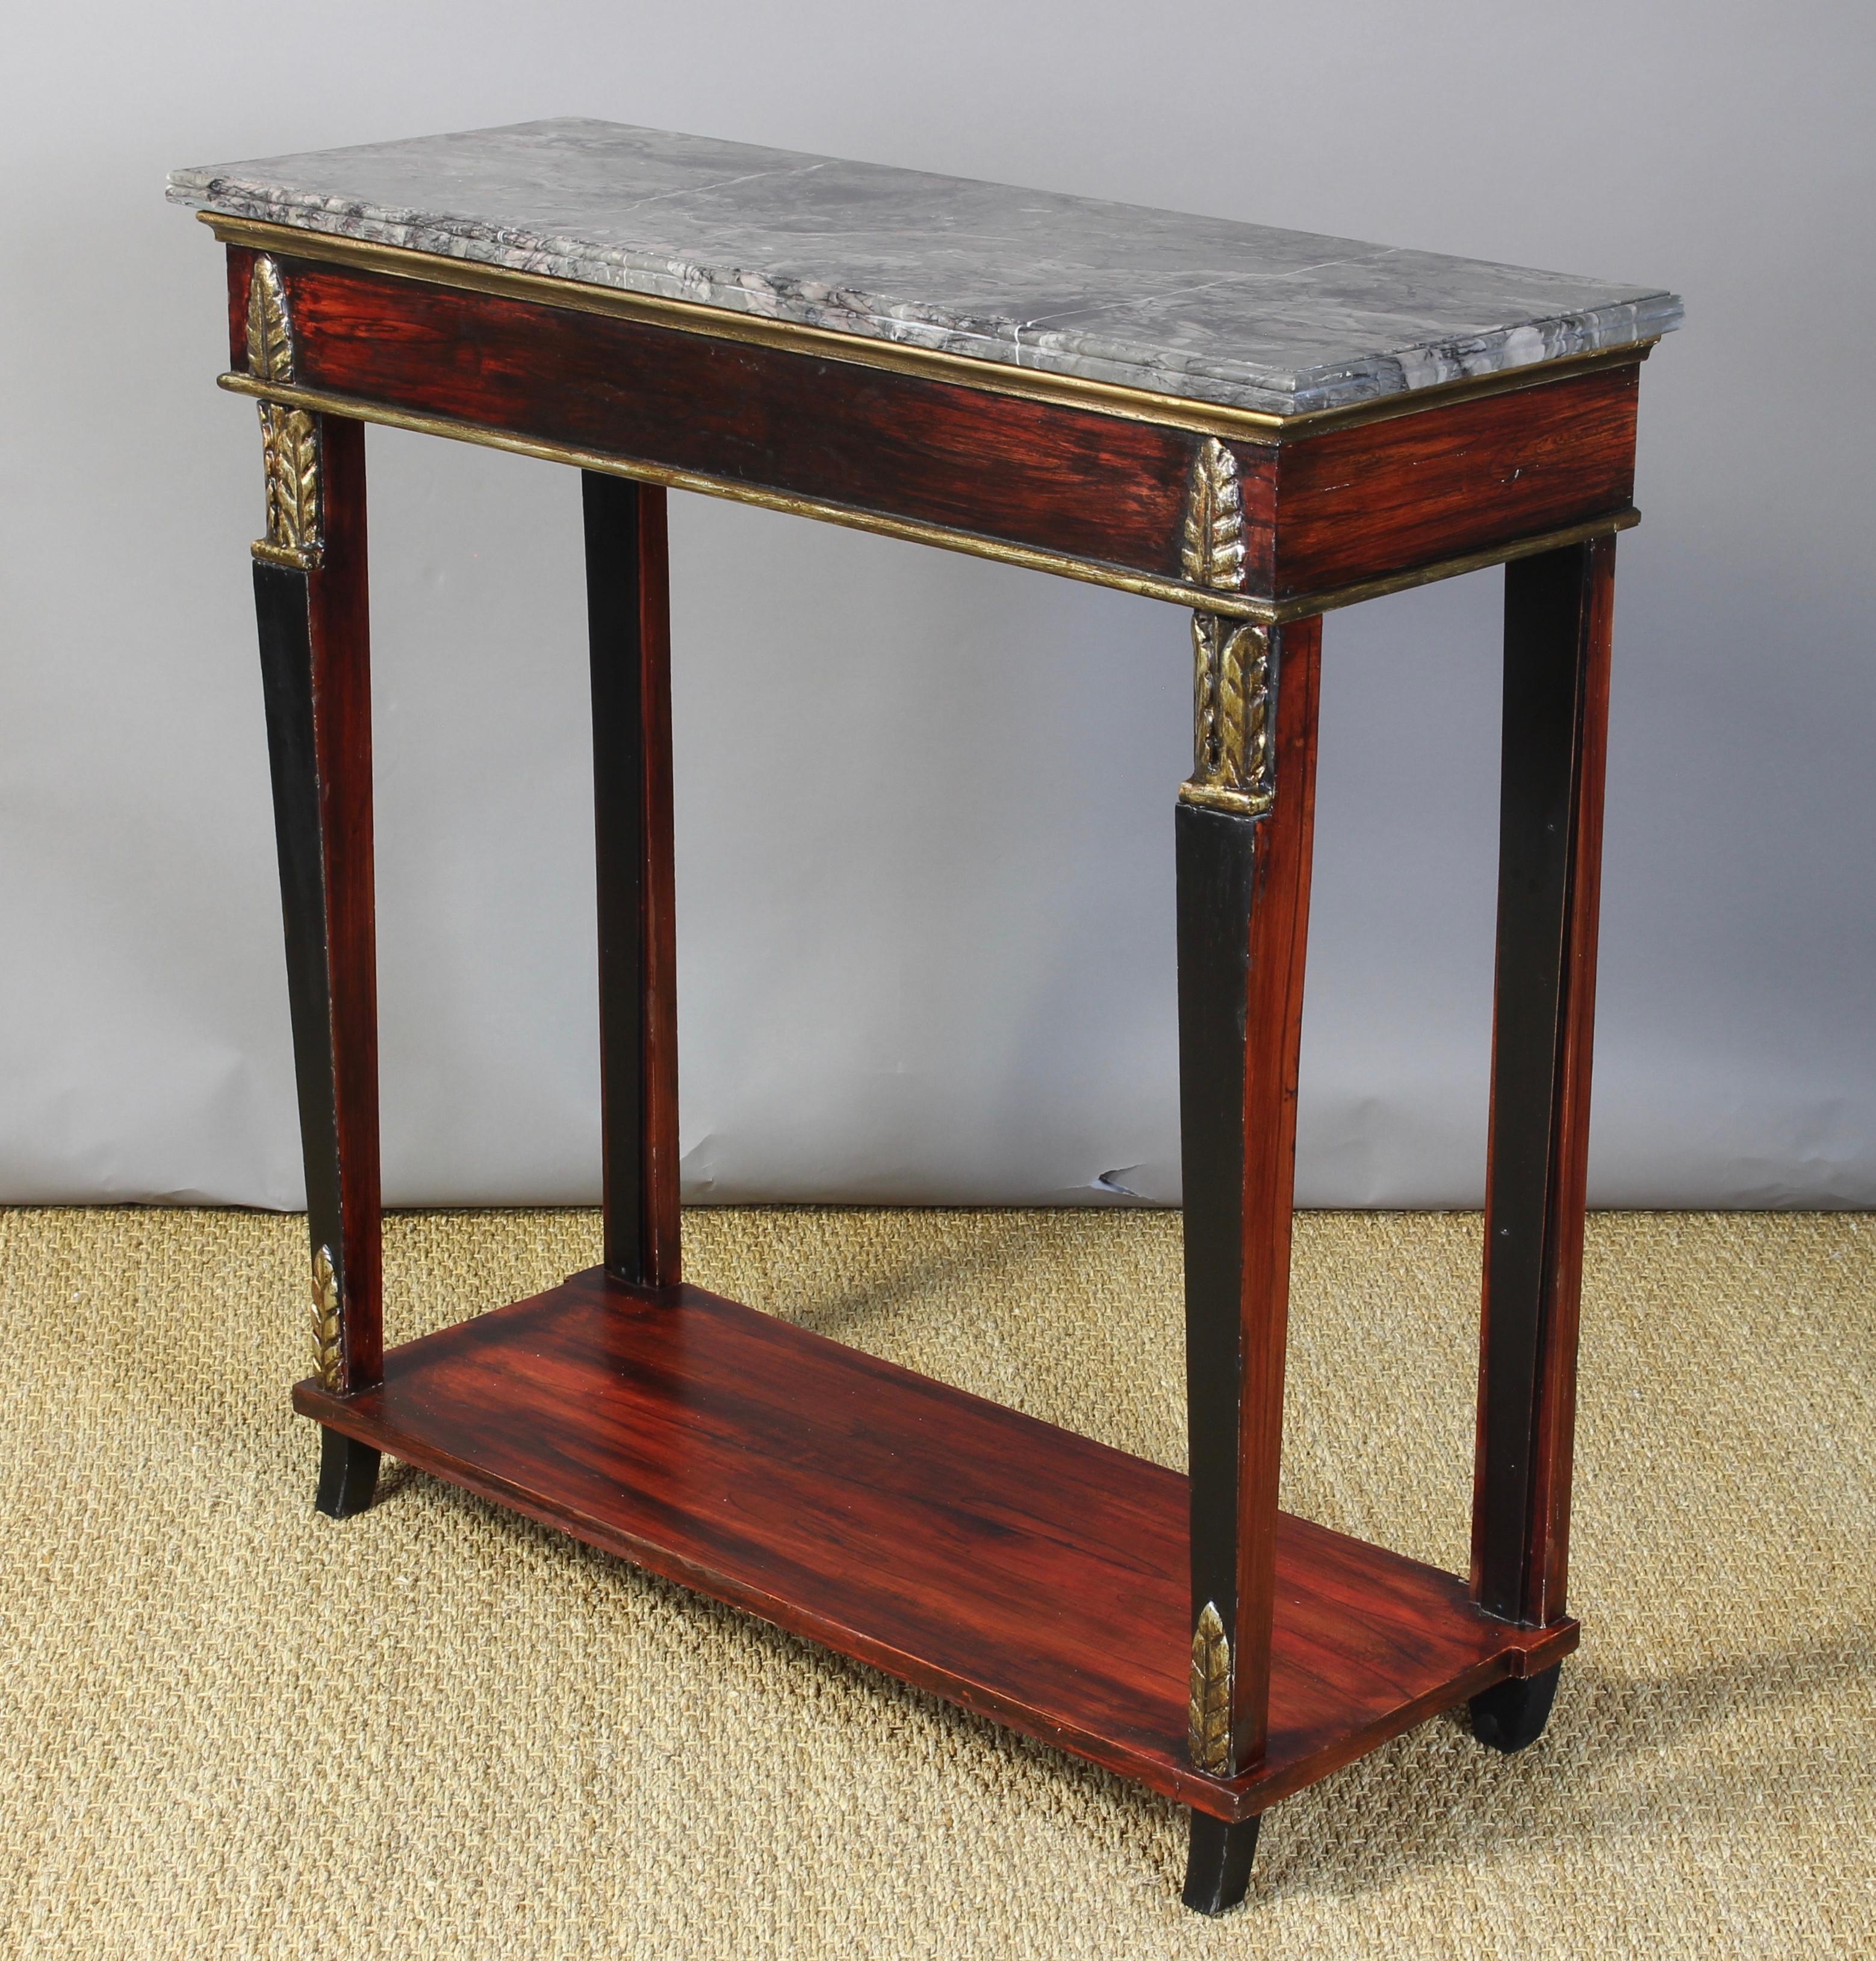 A small and charming mid-20th century Italian neoclassical styled console table with faux rosewood graining and ebony and gilt accents with nicely figured gray marble top.